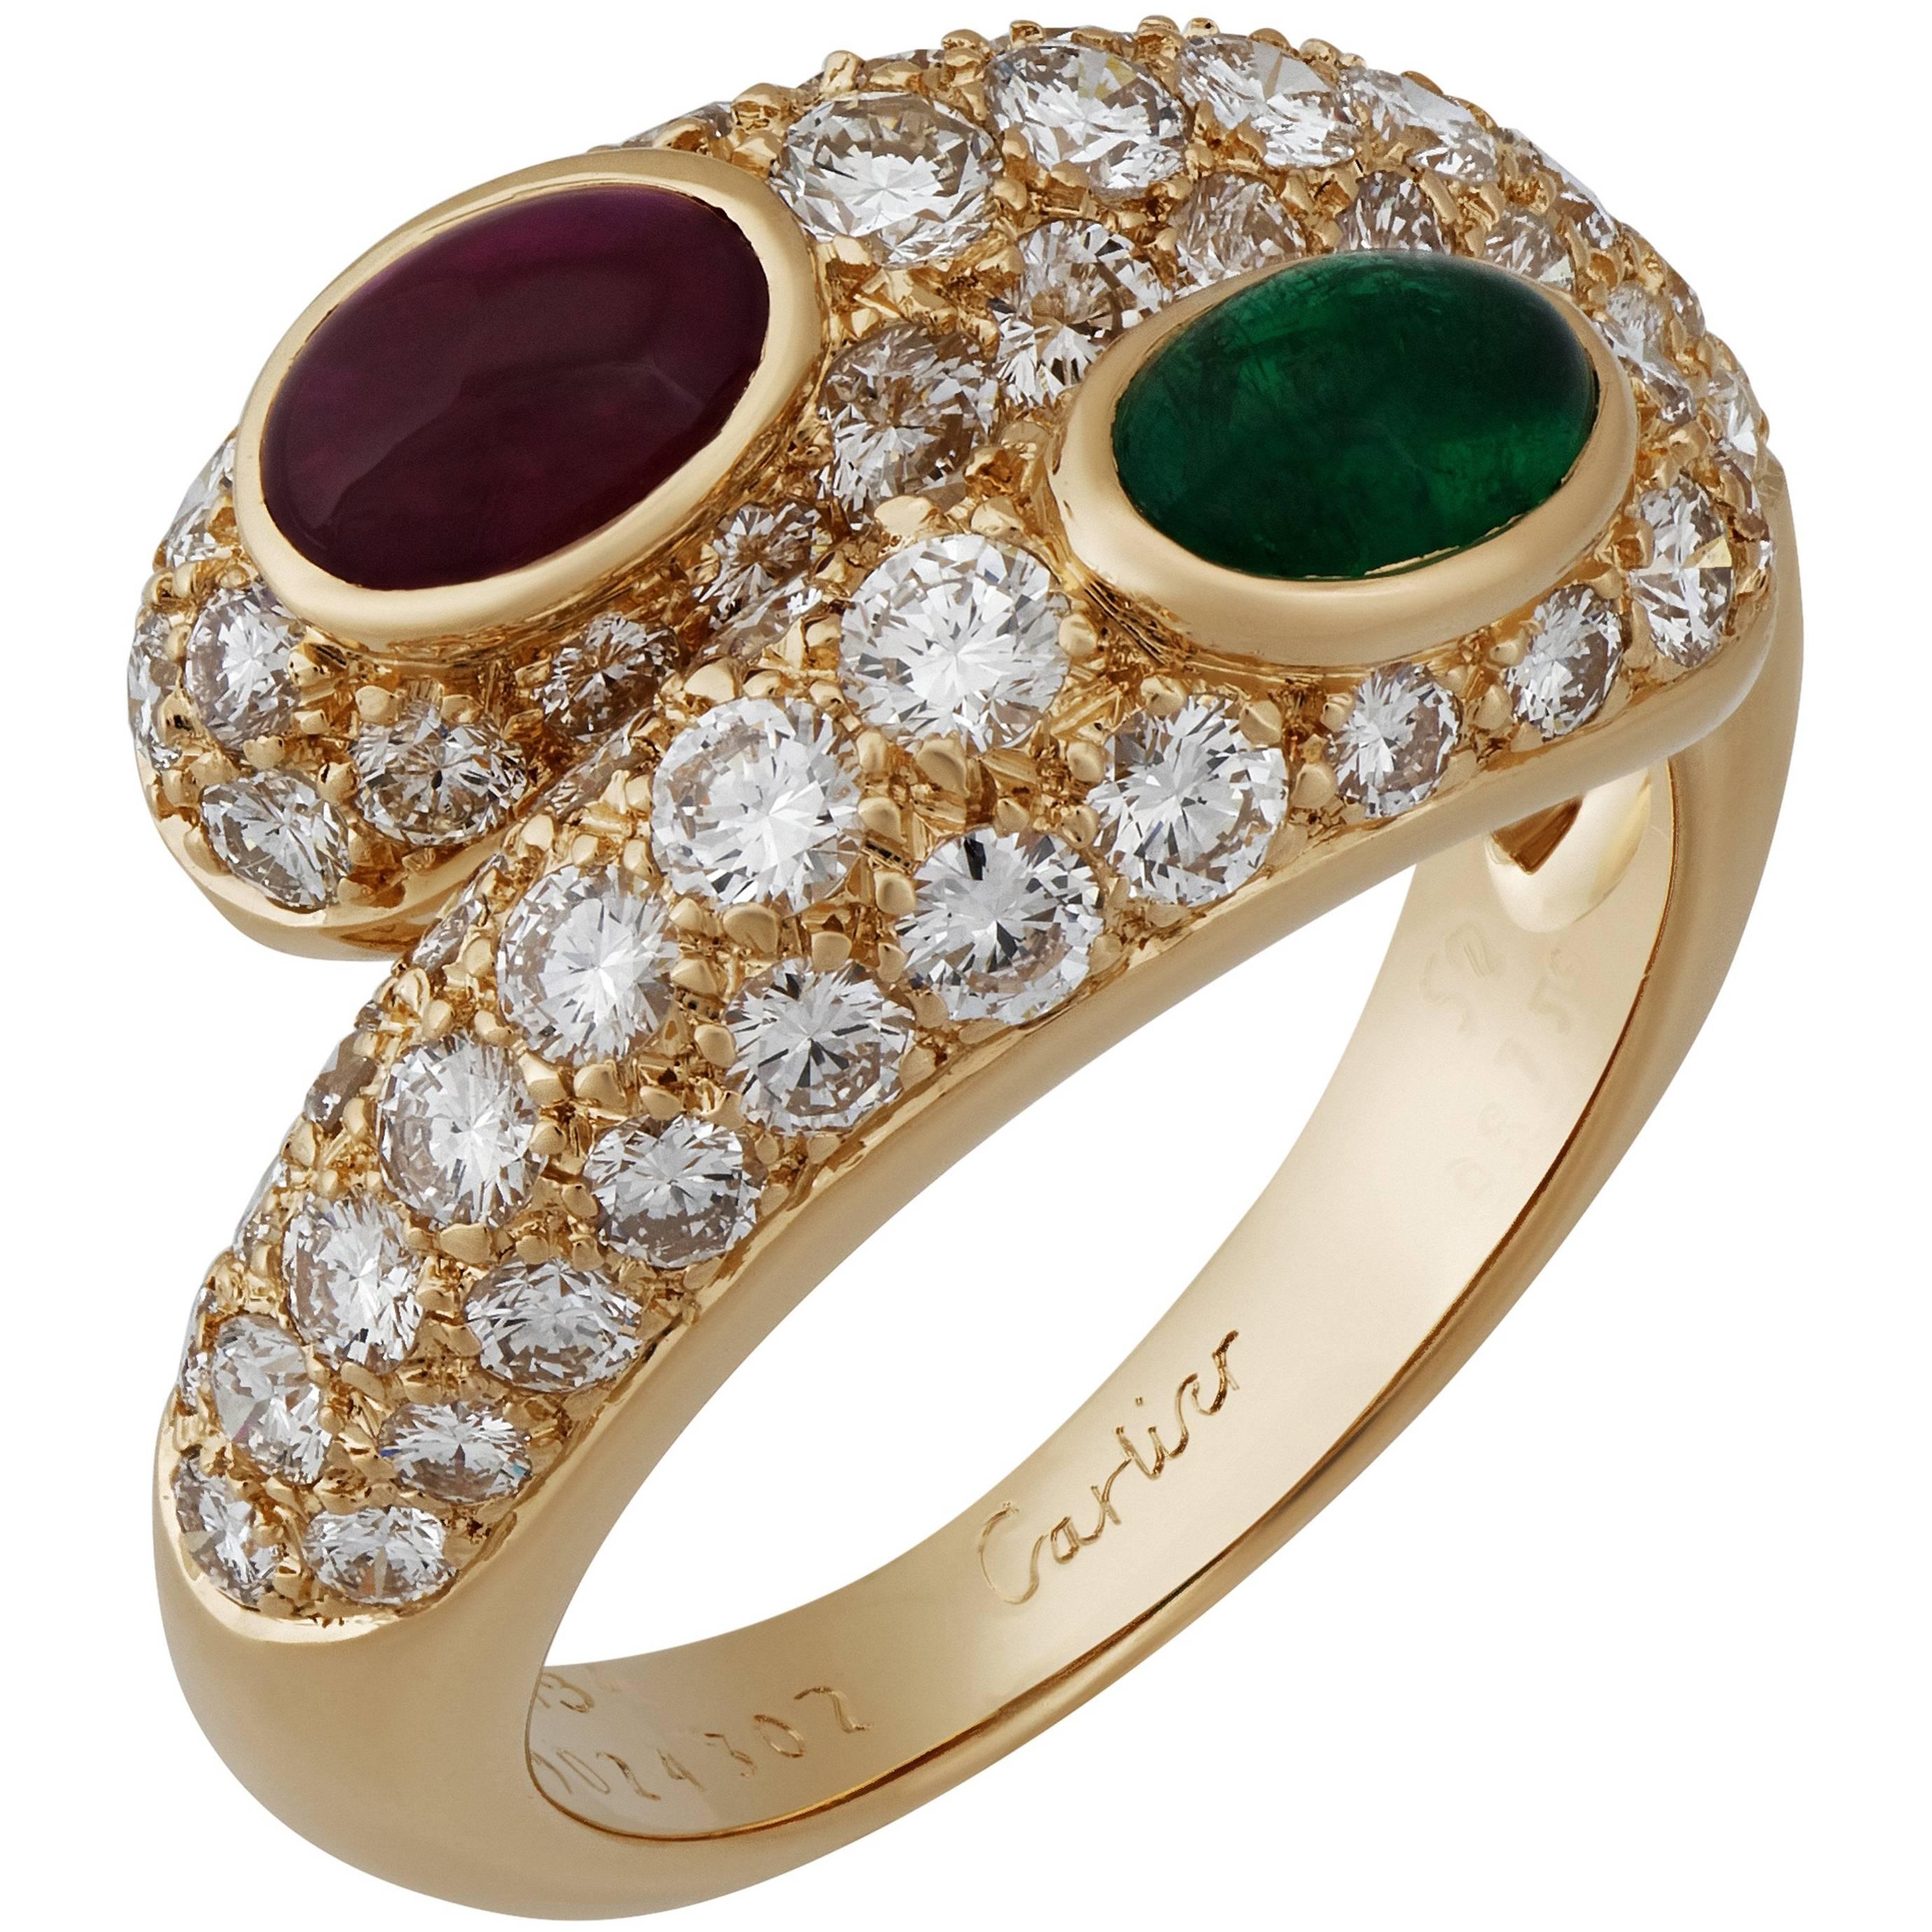 Cartier 18K Yellow Gold Emerald, Ruby and Diamond Bypass Ring Size: 6